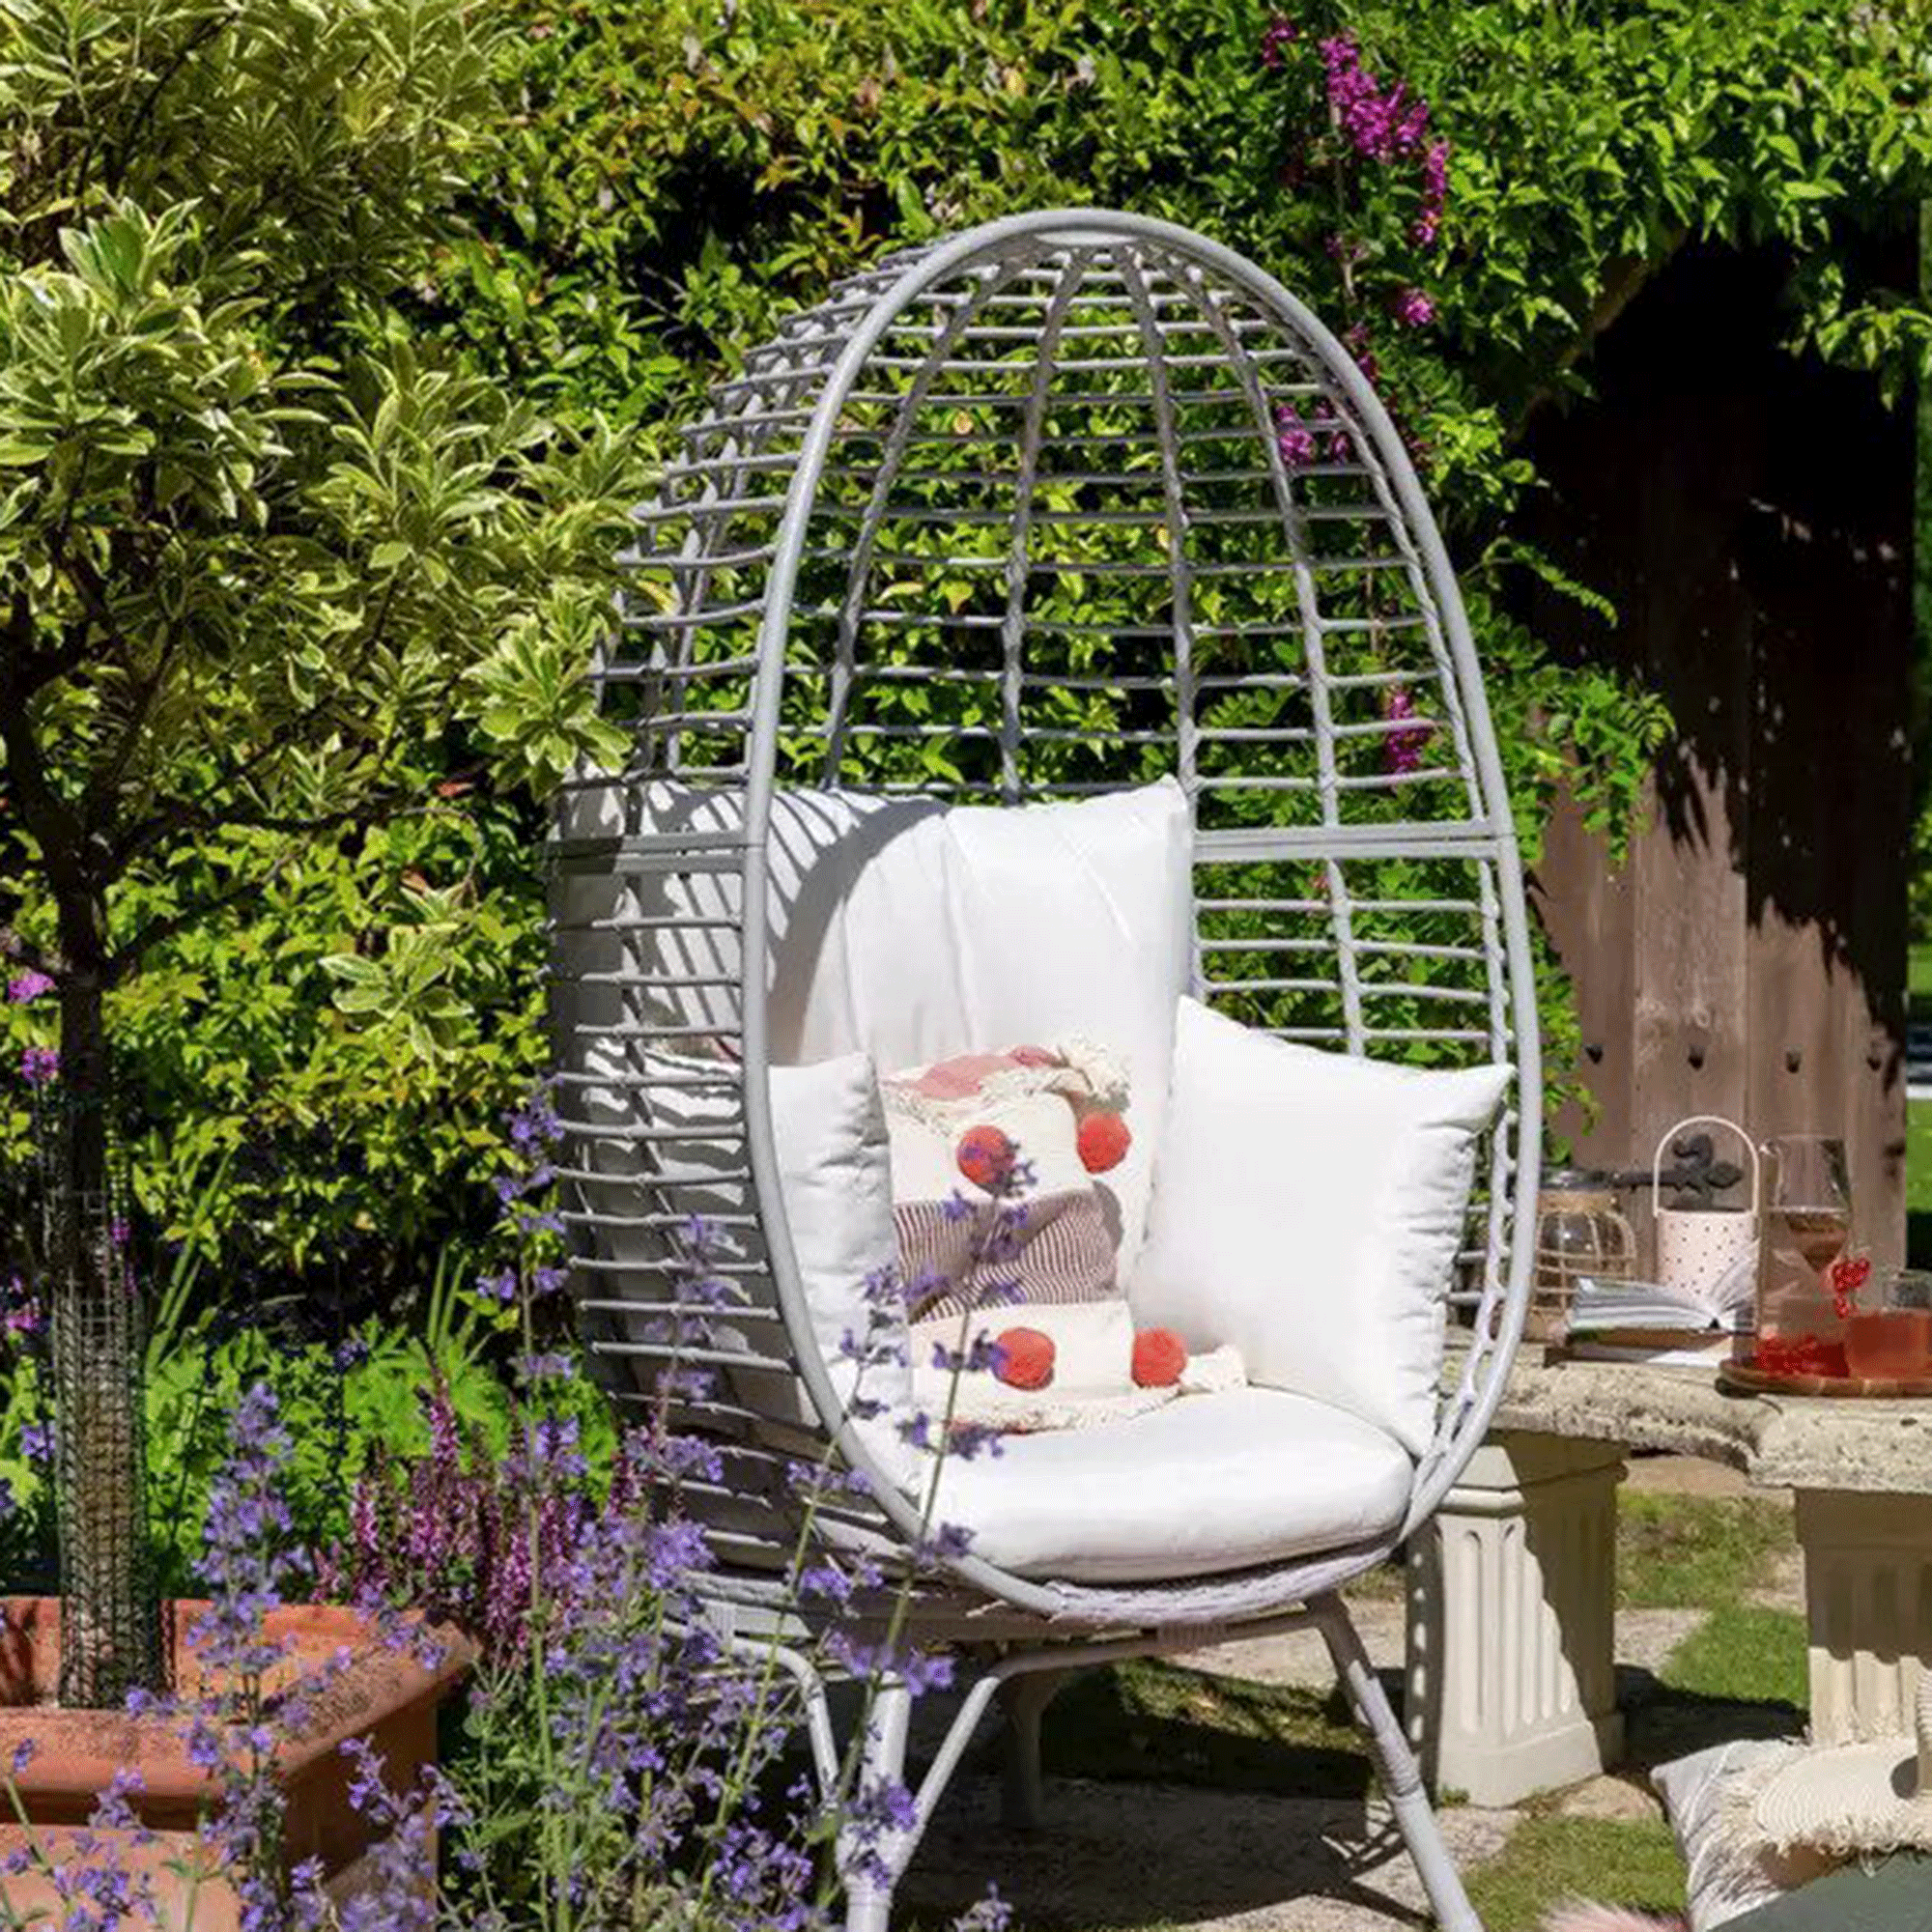 Argos is having a major garden furniture sale – here are the 10 best pieces to snap up now